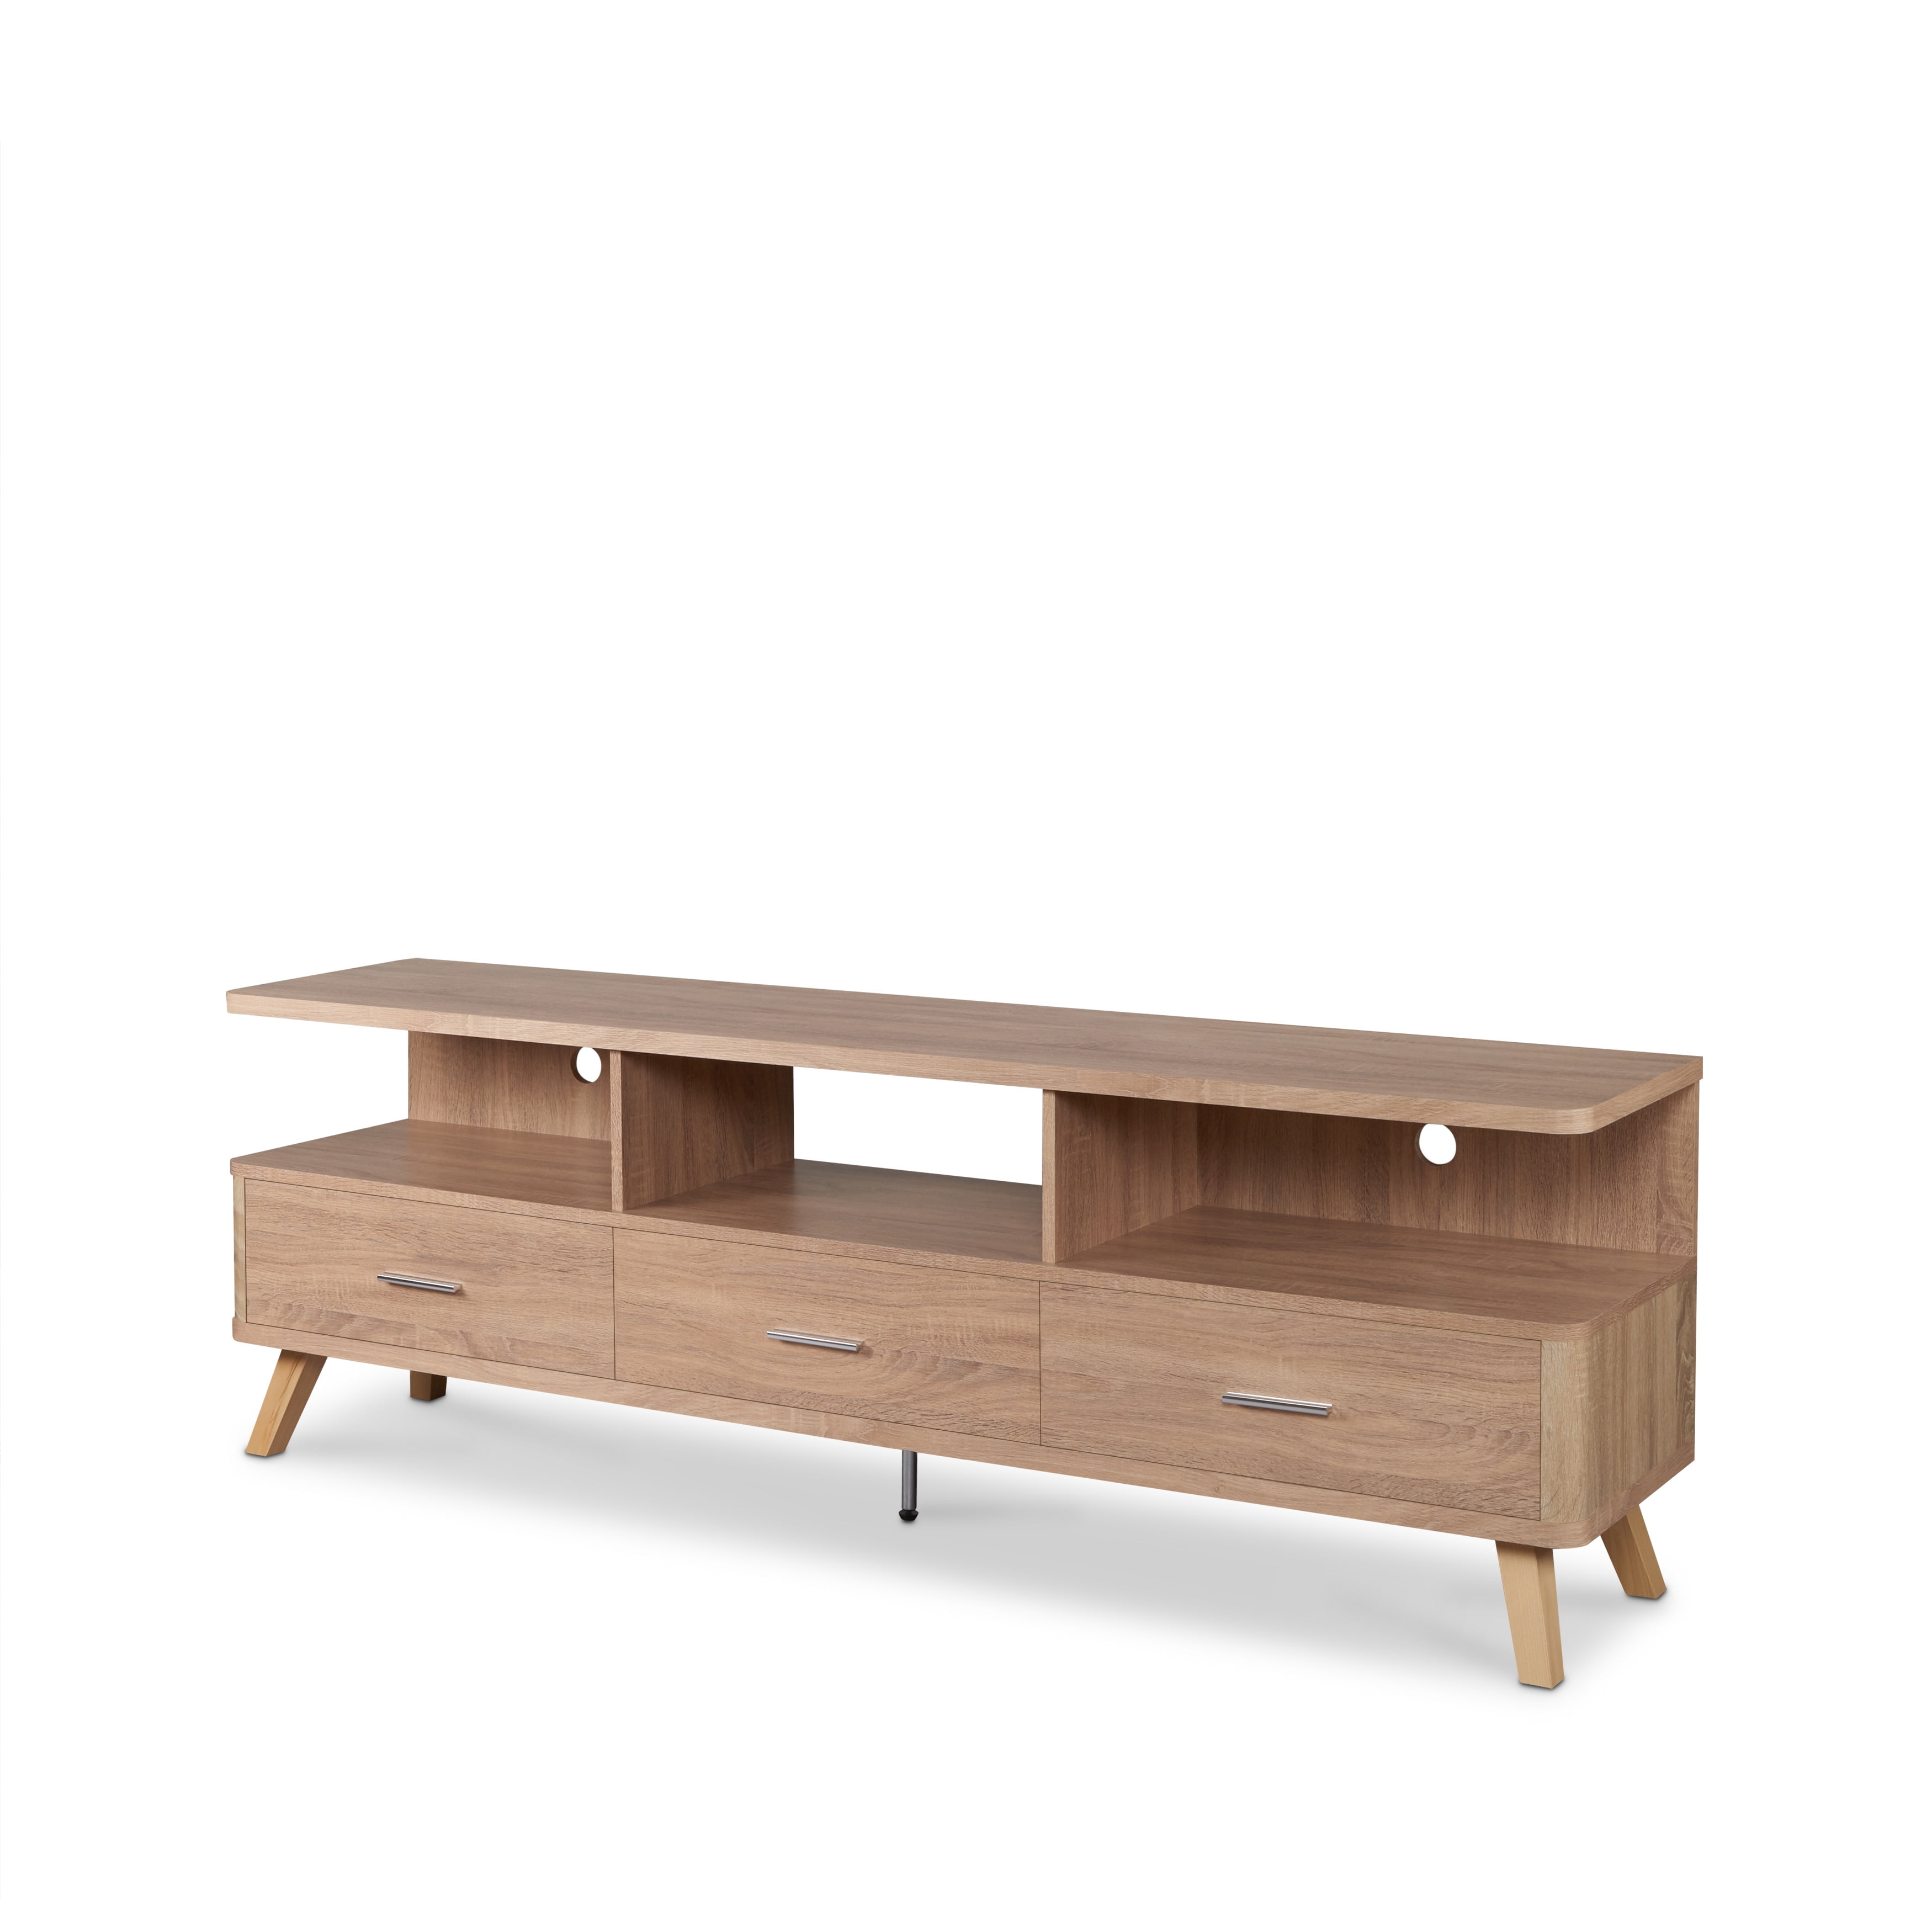 ACME Lakin Rustic Natural TV Stand for up to 60